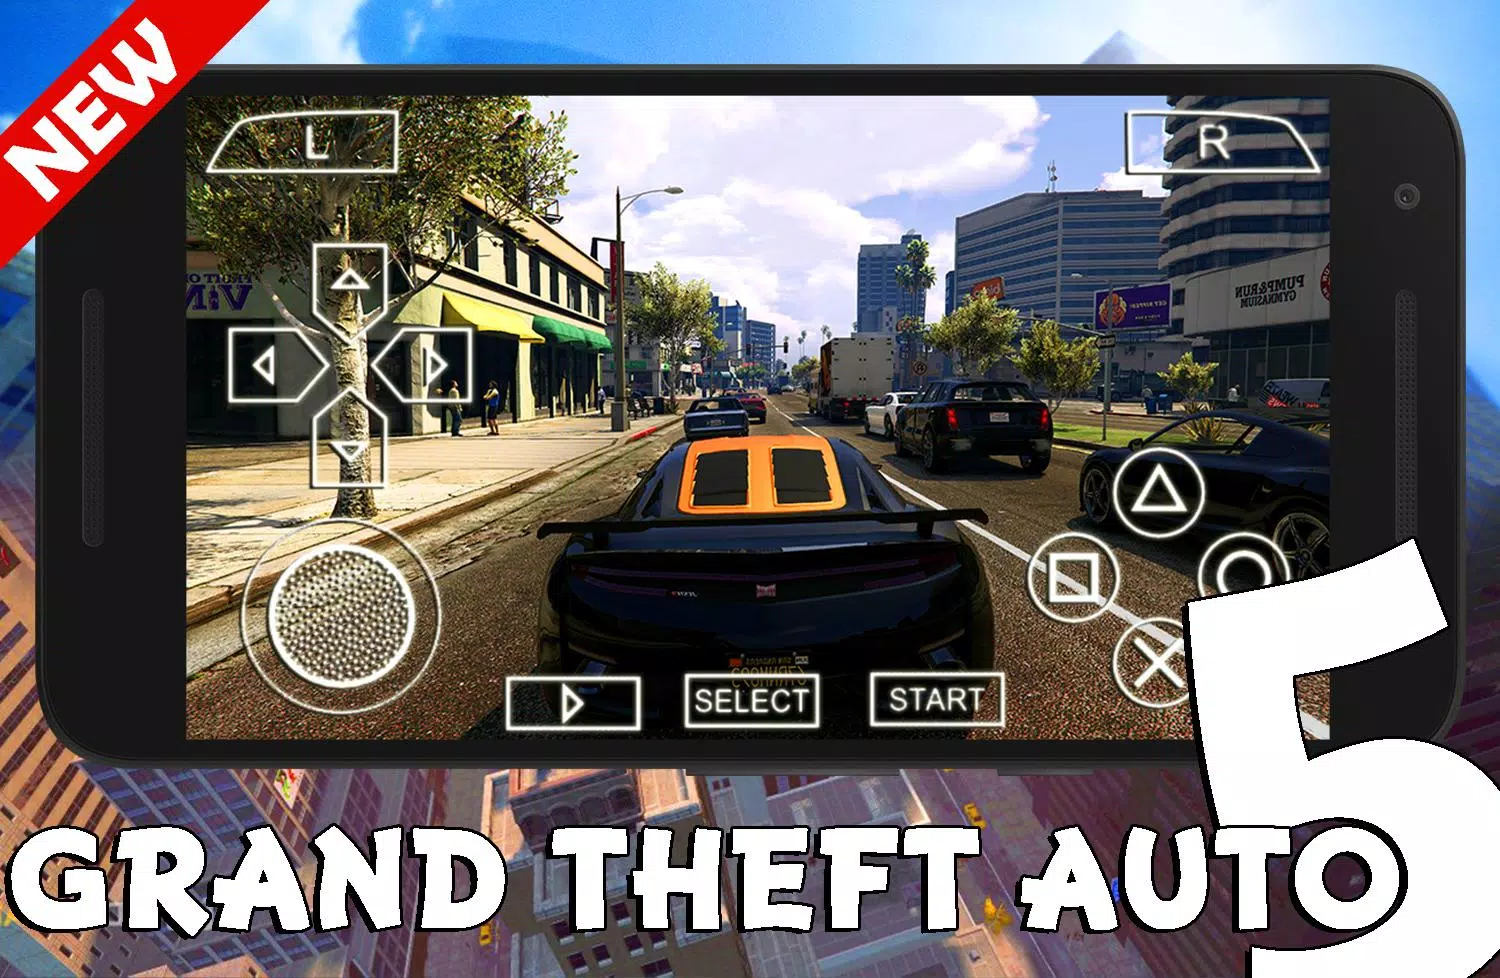 Download Grand Theft Auto V - Unofficial APK for Android - free